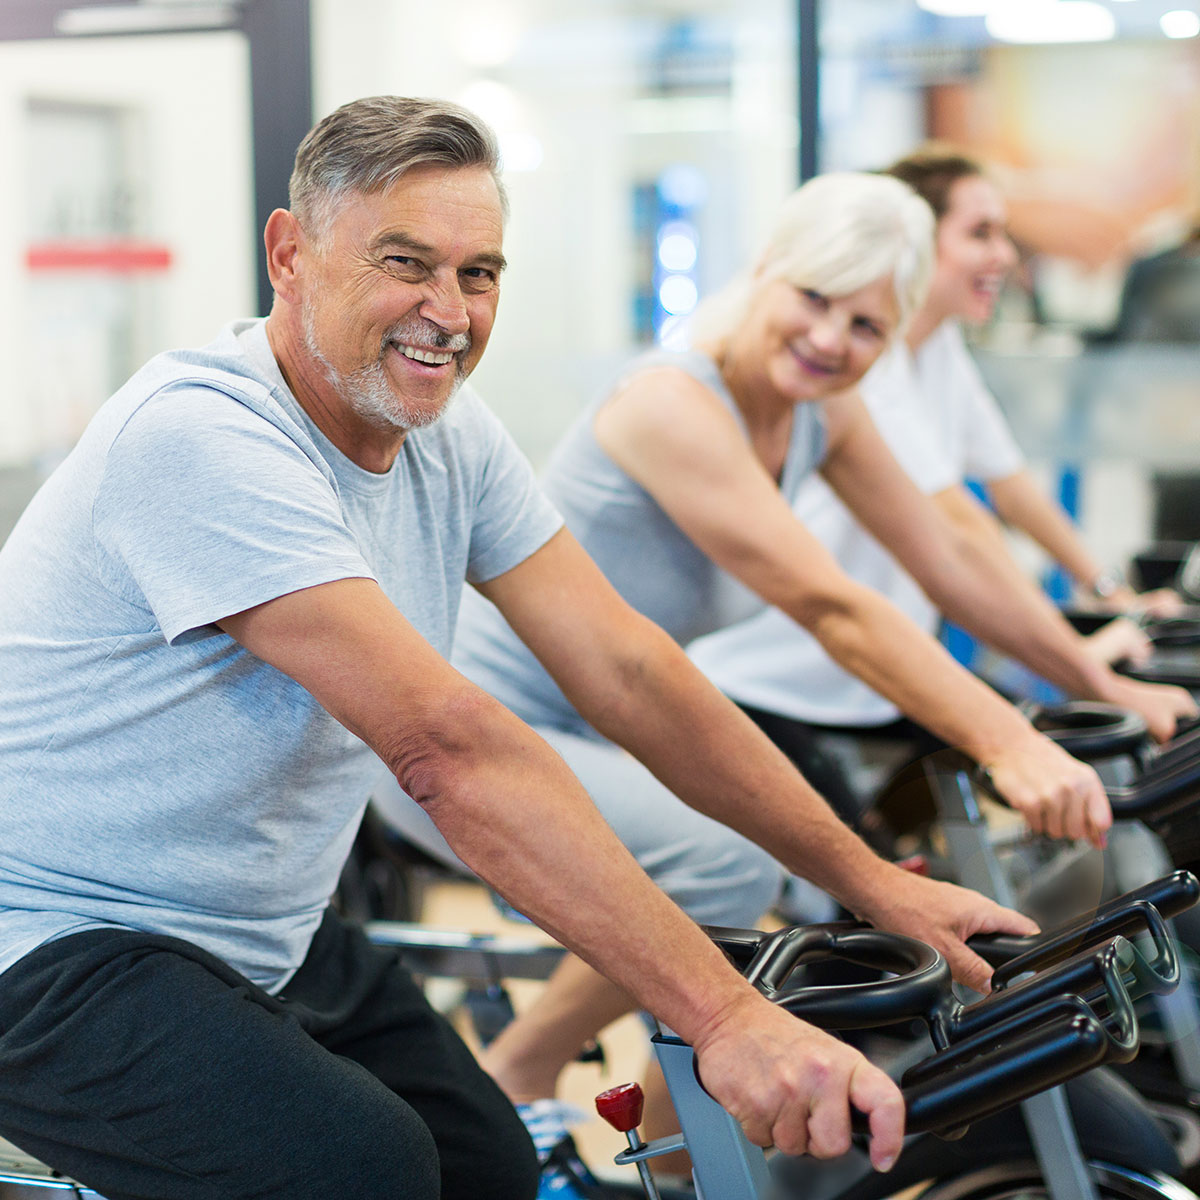 A man and a woman ride exercise bikes at a fitness facility.